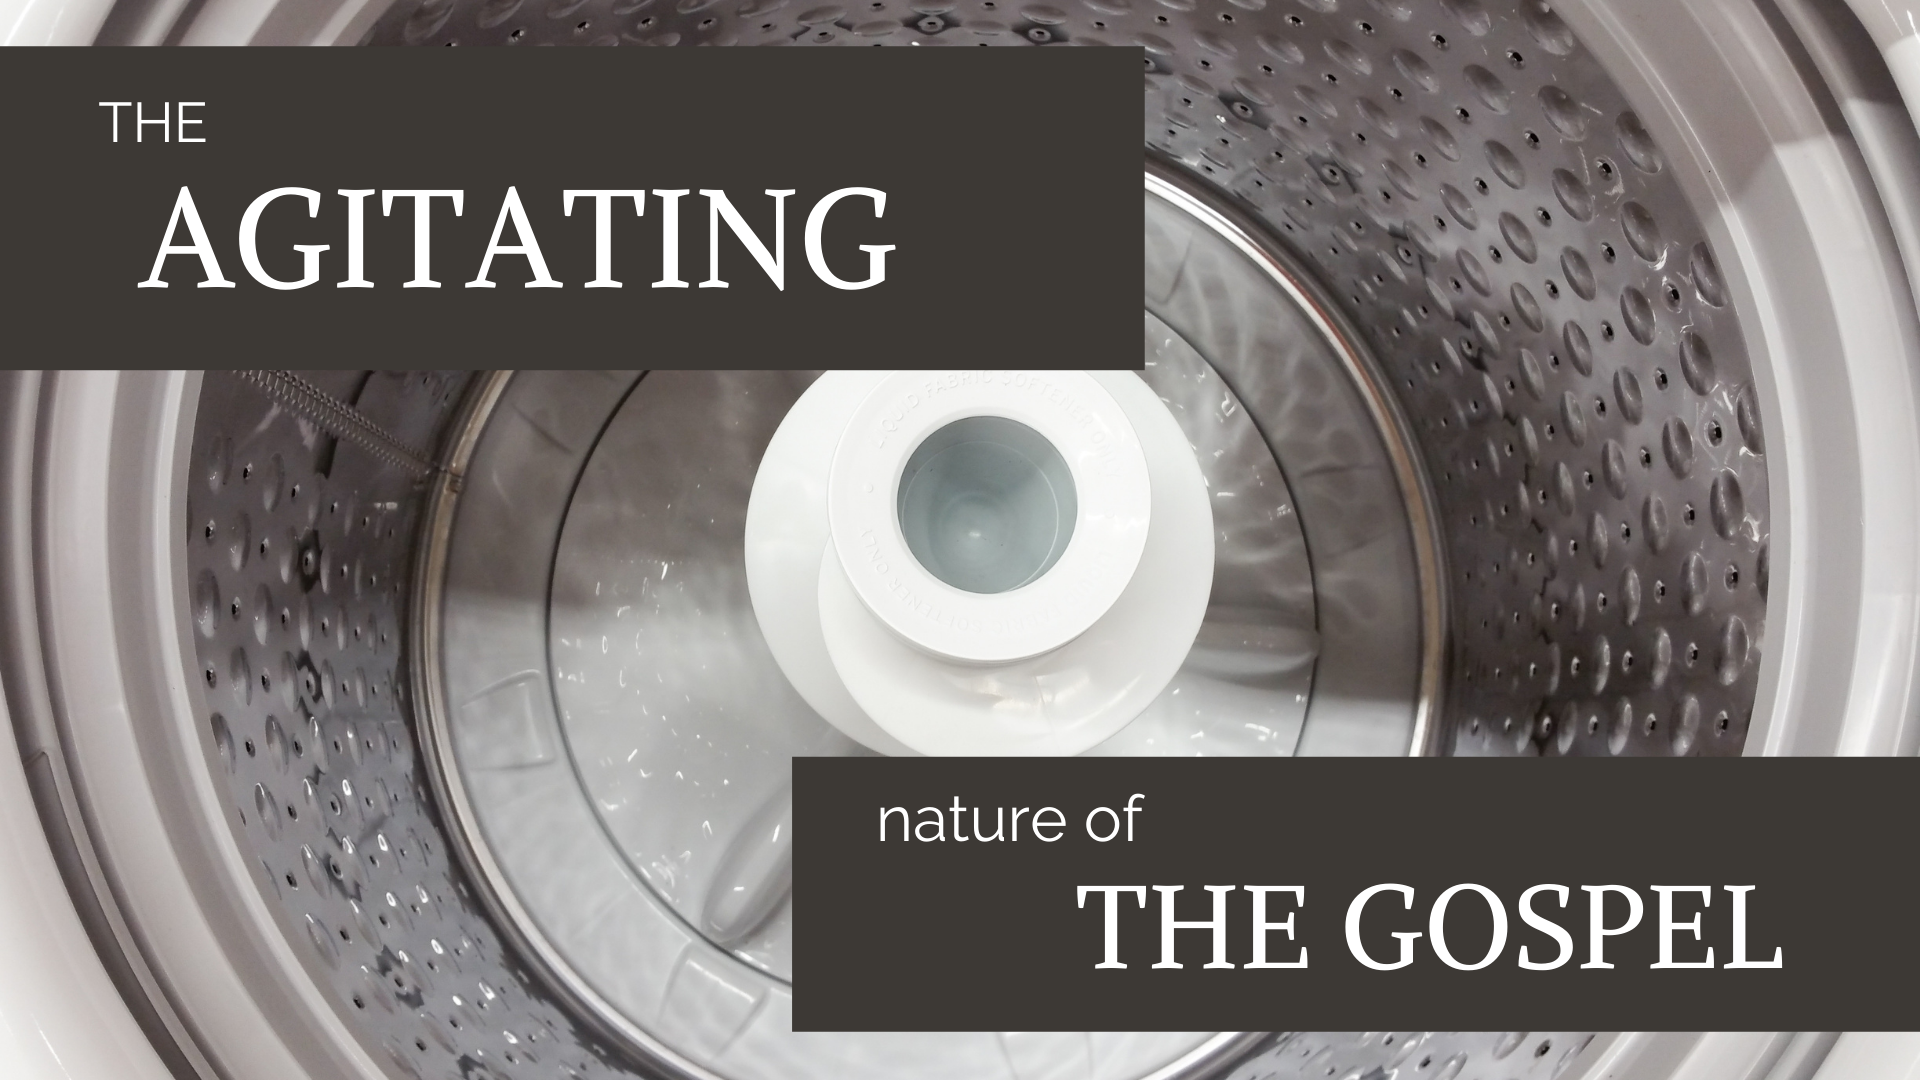 The Agitating Nature of the Gospel